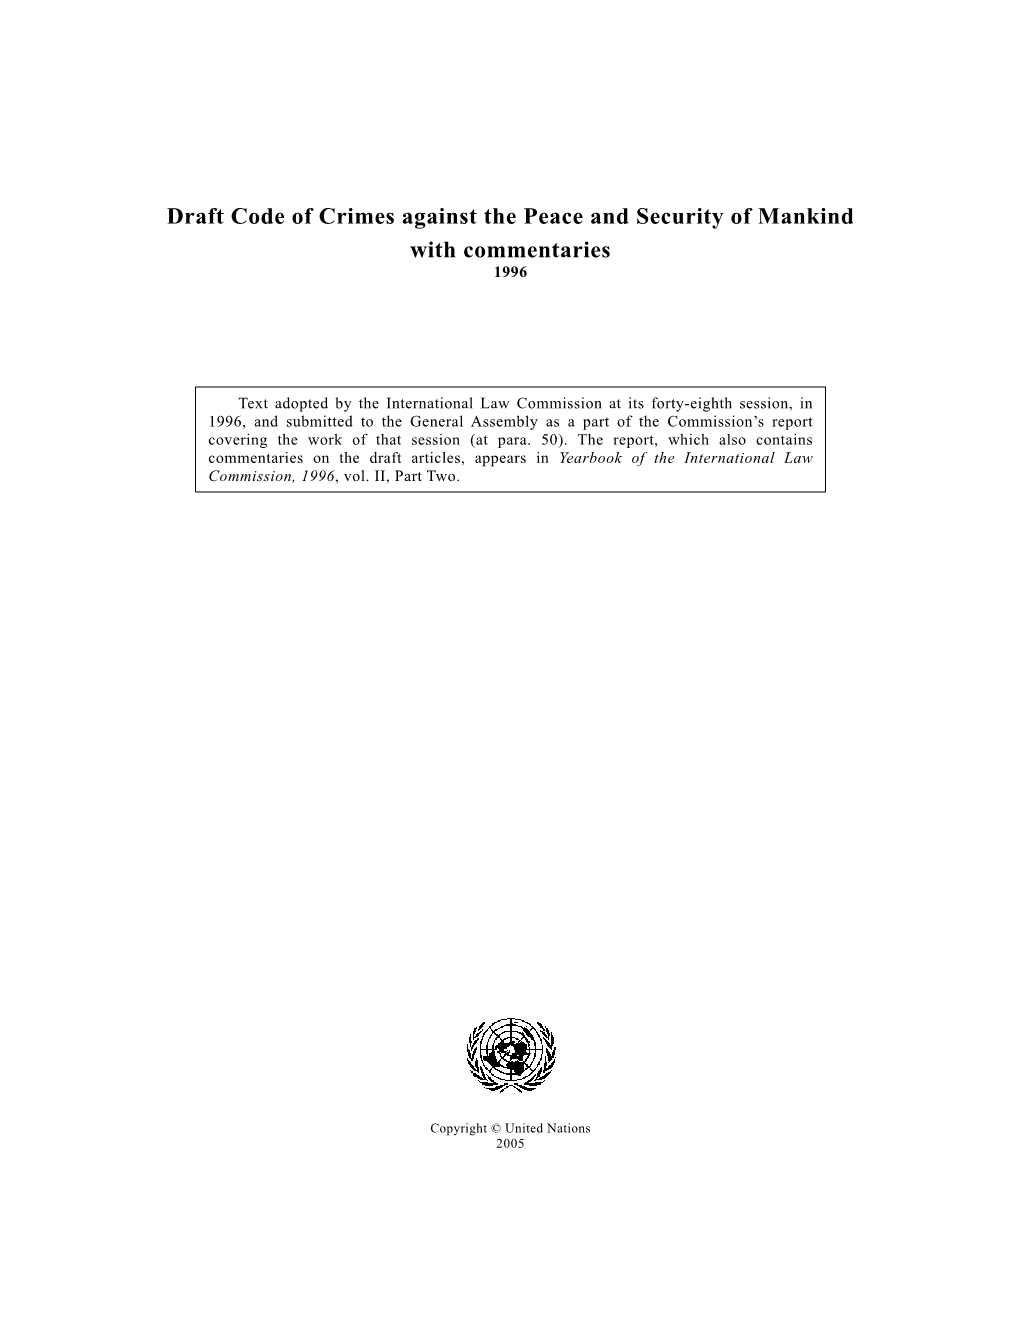 Draft Code of Crimes Against the Peace and Security of Mankind with Commentaries 1996